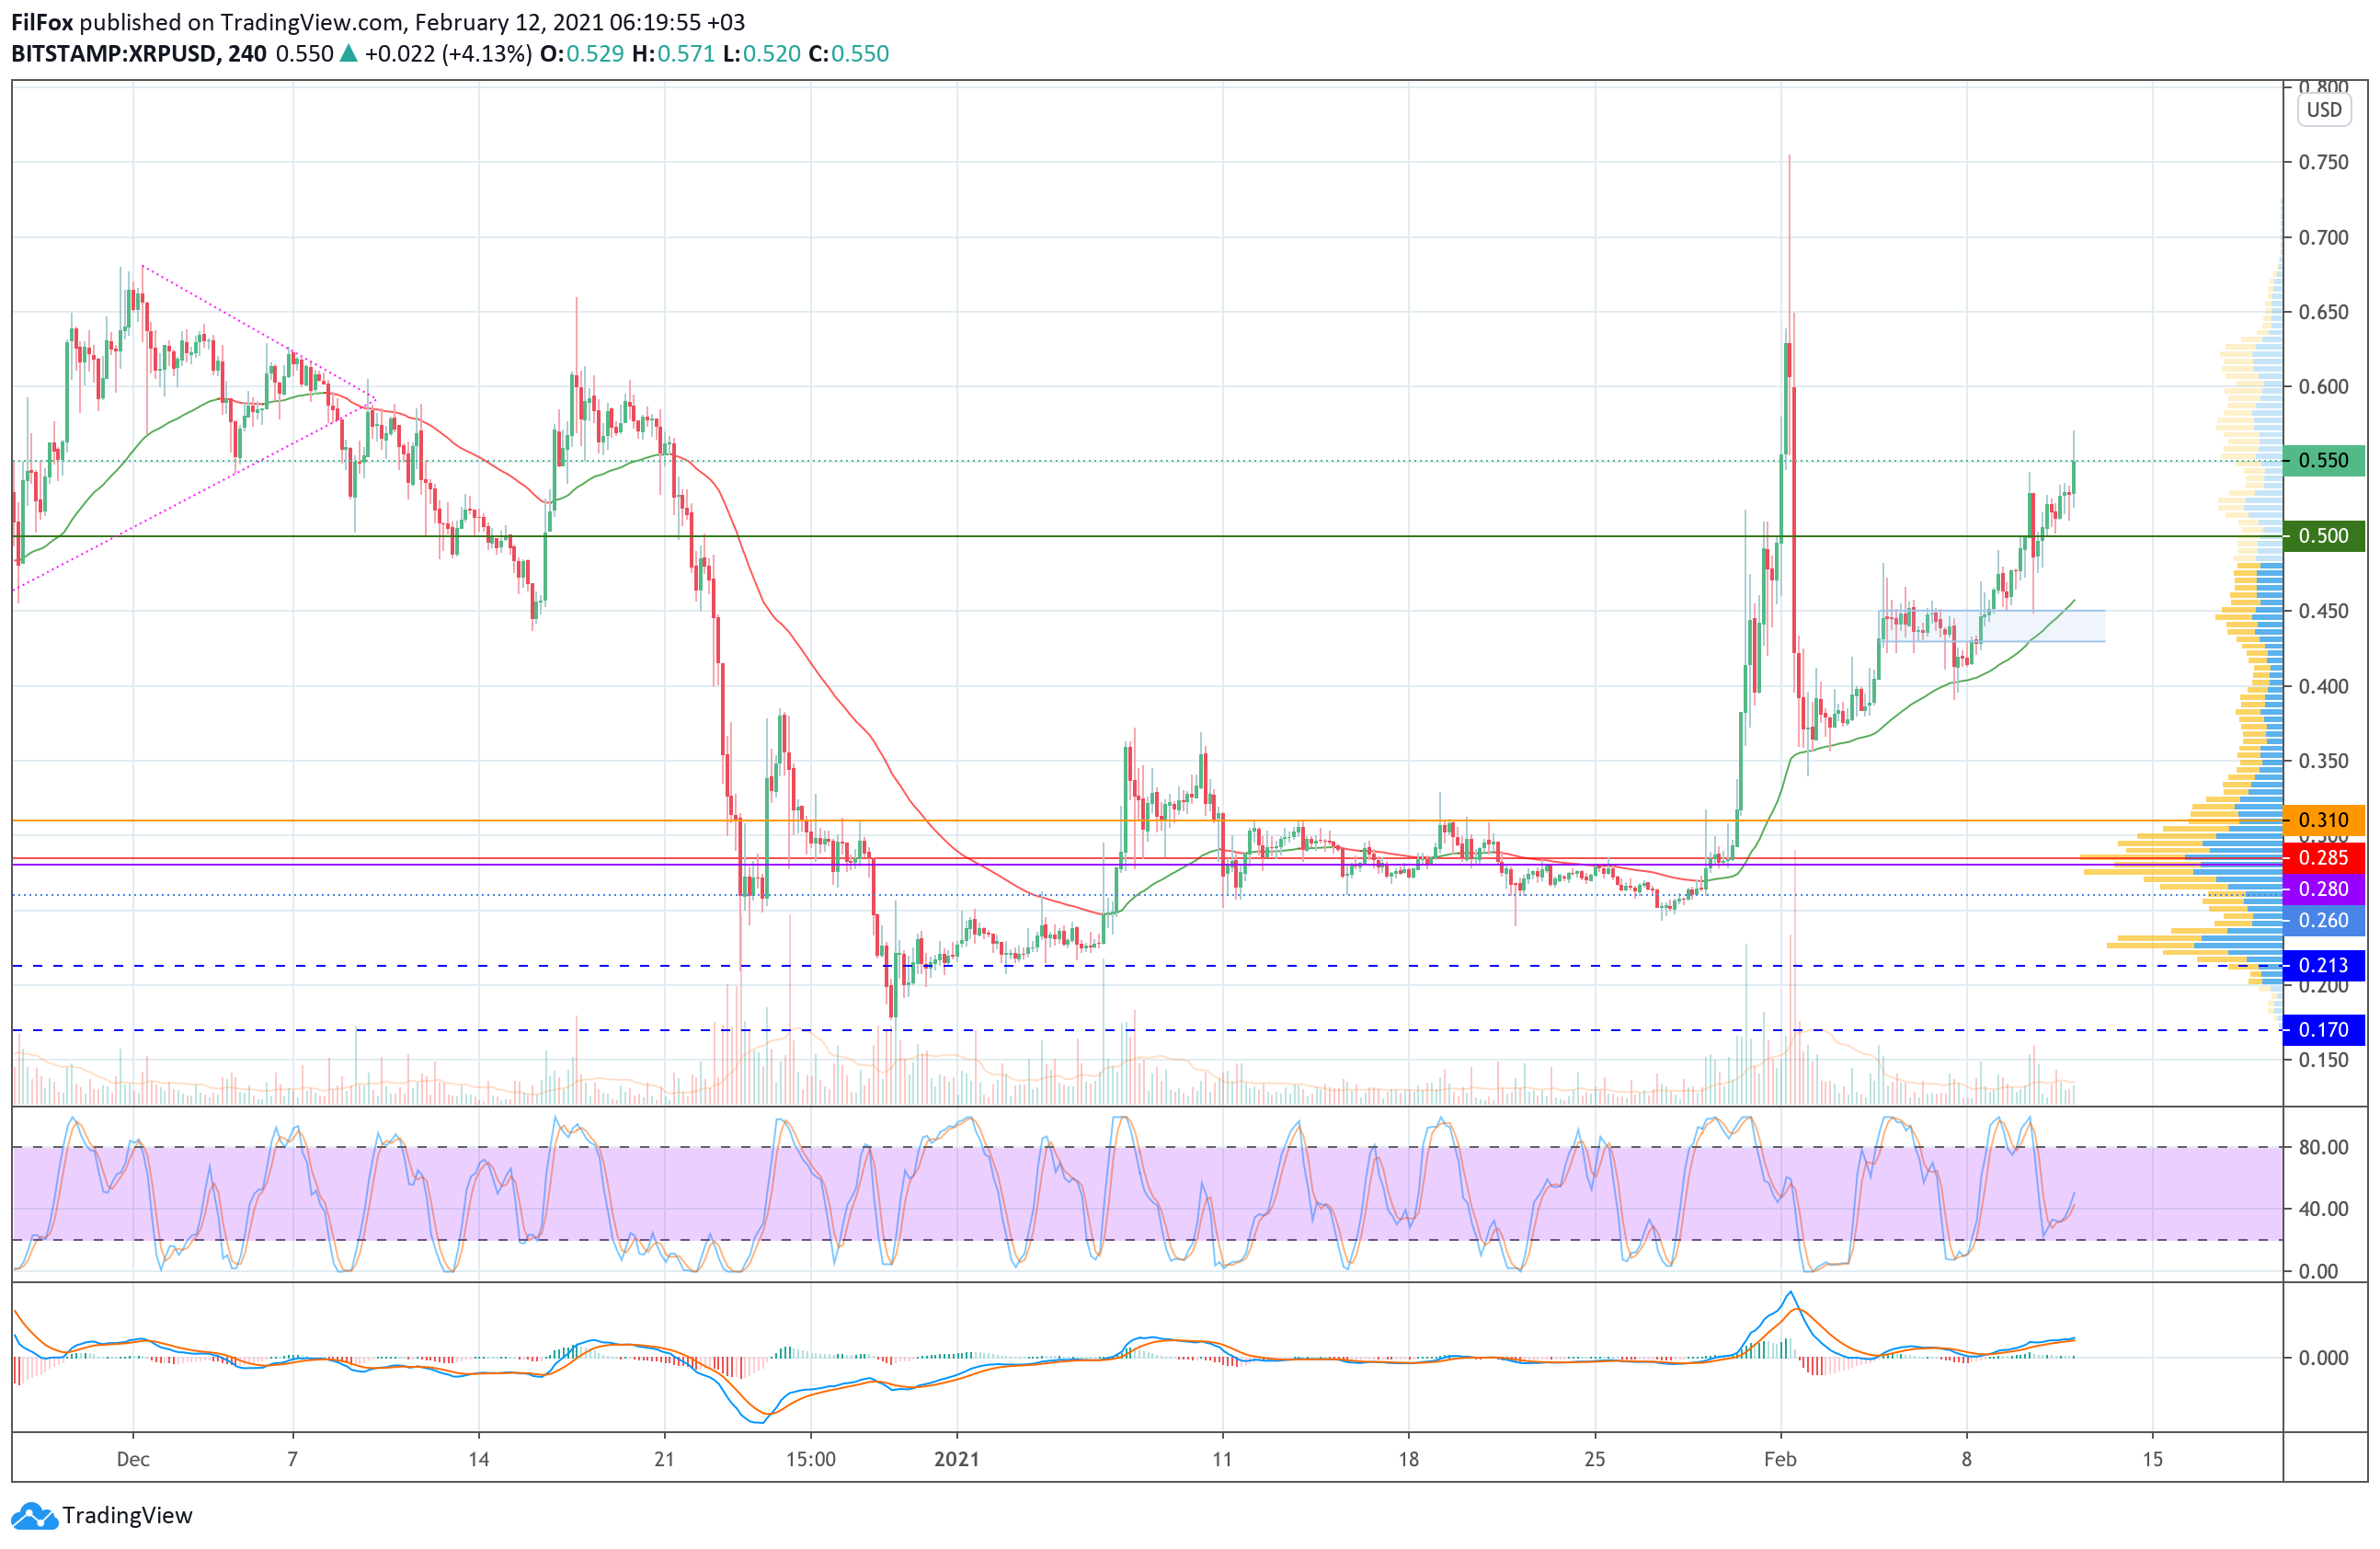 Analysis of prices for Bitcoin, Ethereum, XRP for 02/12/2021